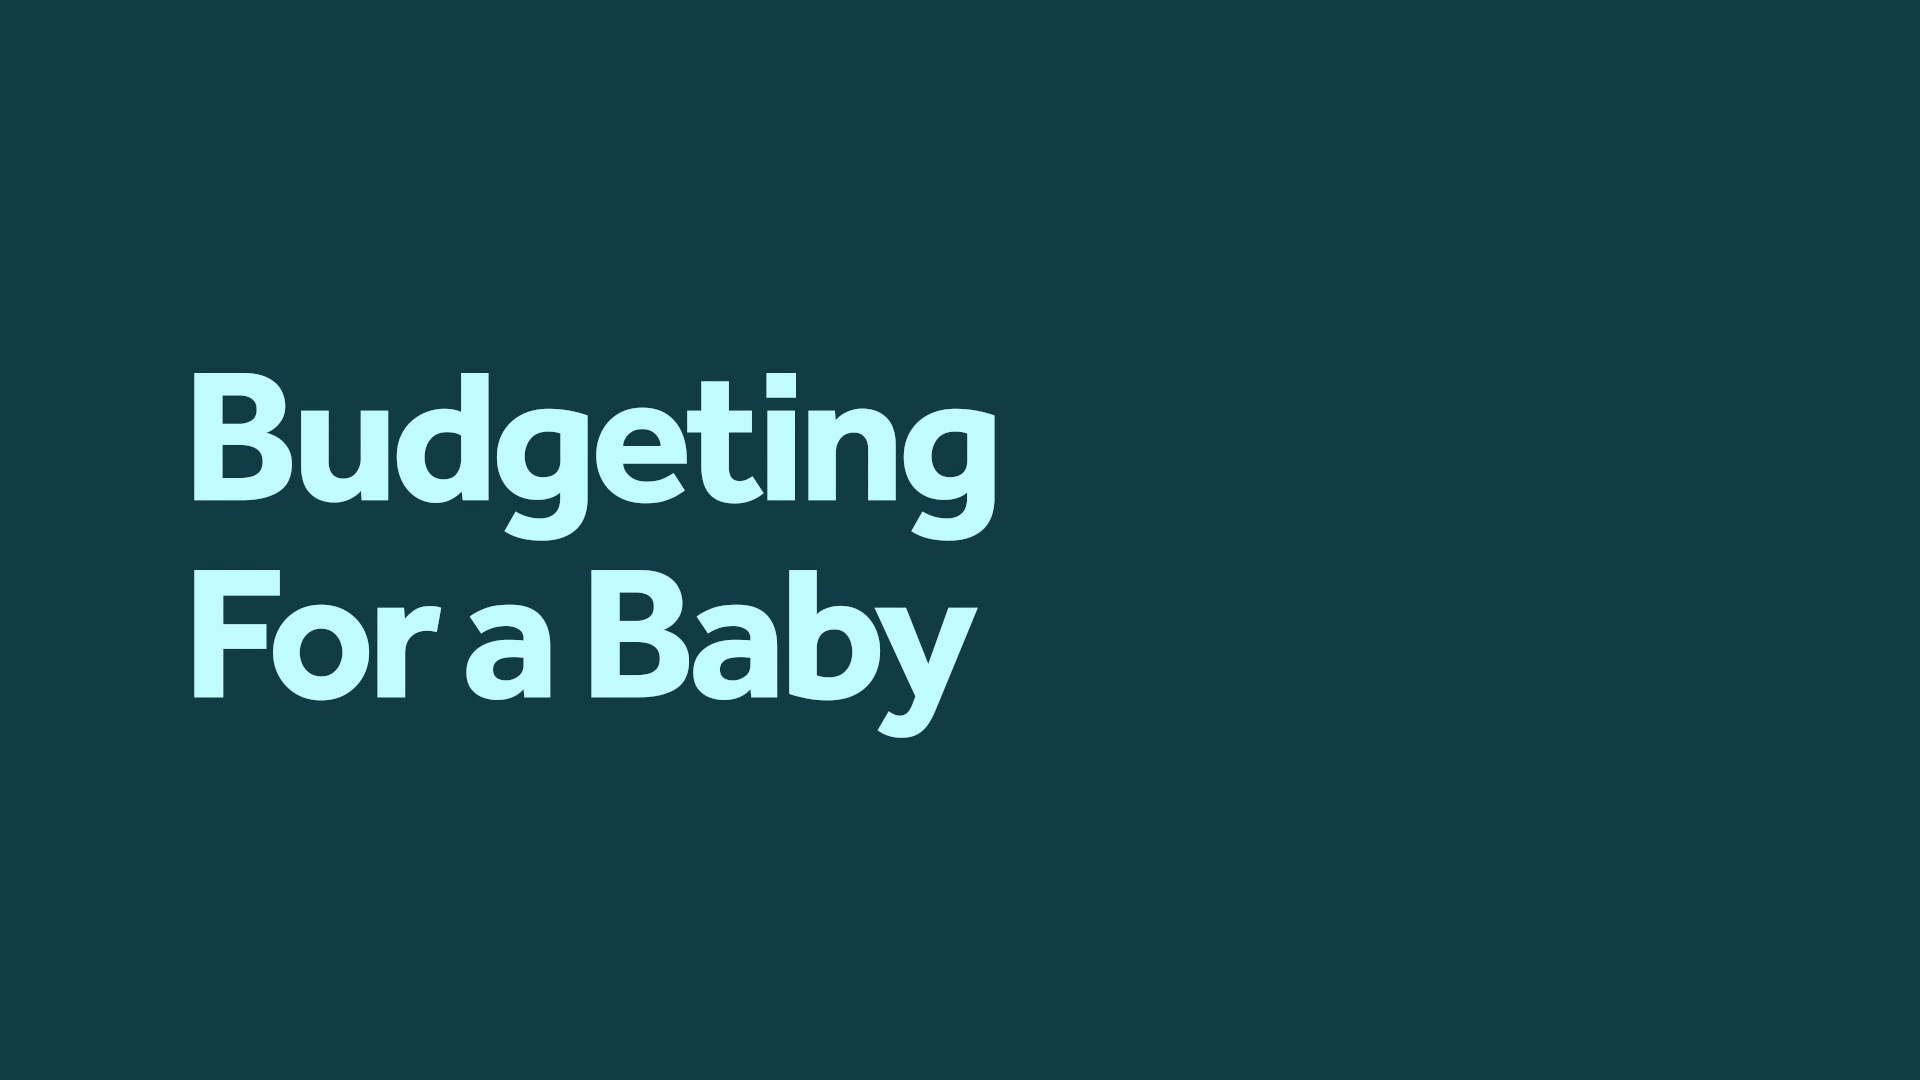 Barclays | Simon & Natalie | Budgeting For a Baby | 16x9 | 15